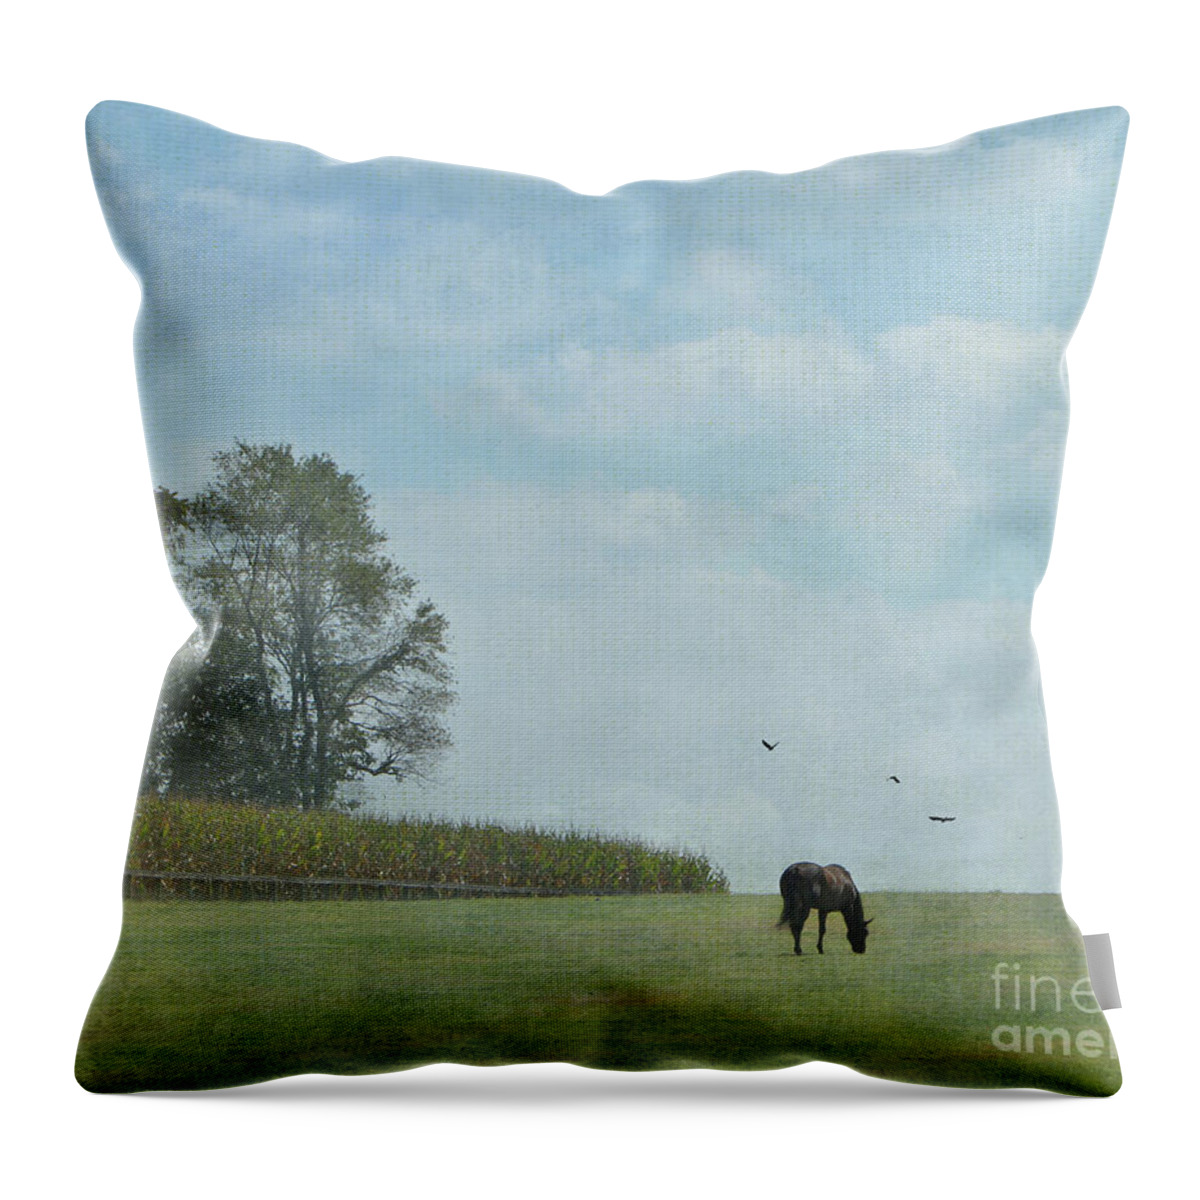 Landscape Throw Pillow featuring the digital art No Worries by Michelle Twohig